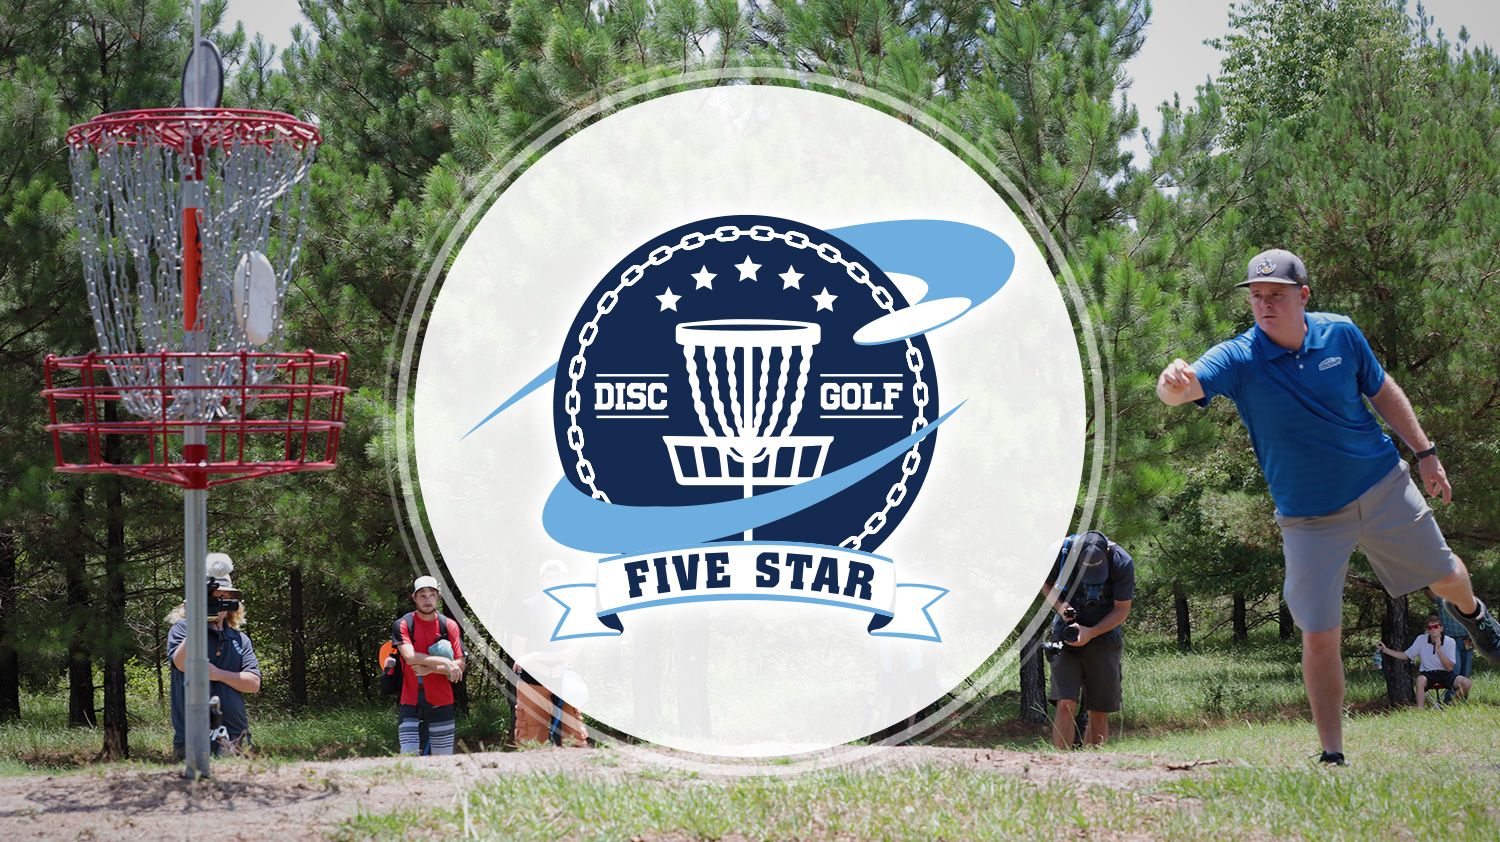 Westmoreland Disc Golf - Your Guide to Disc Golf in Westmoreland